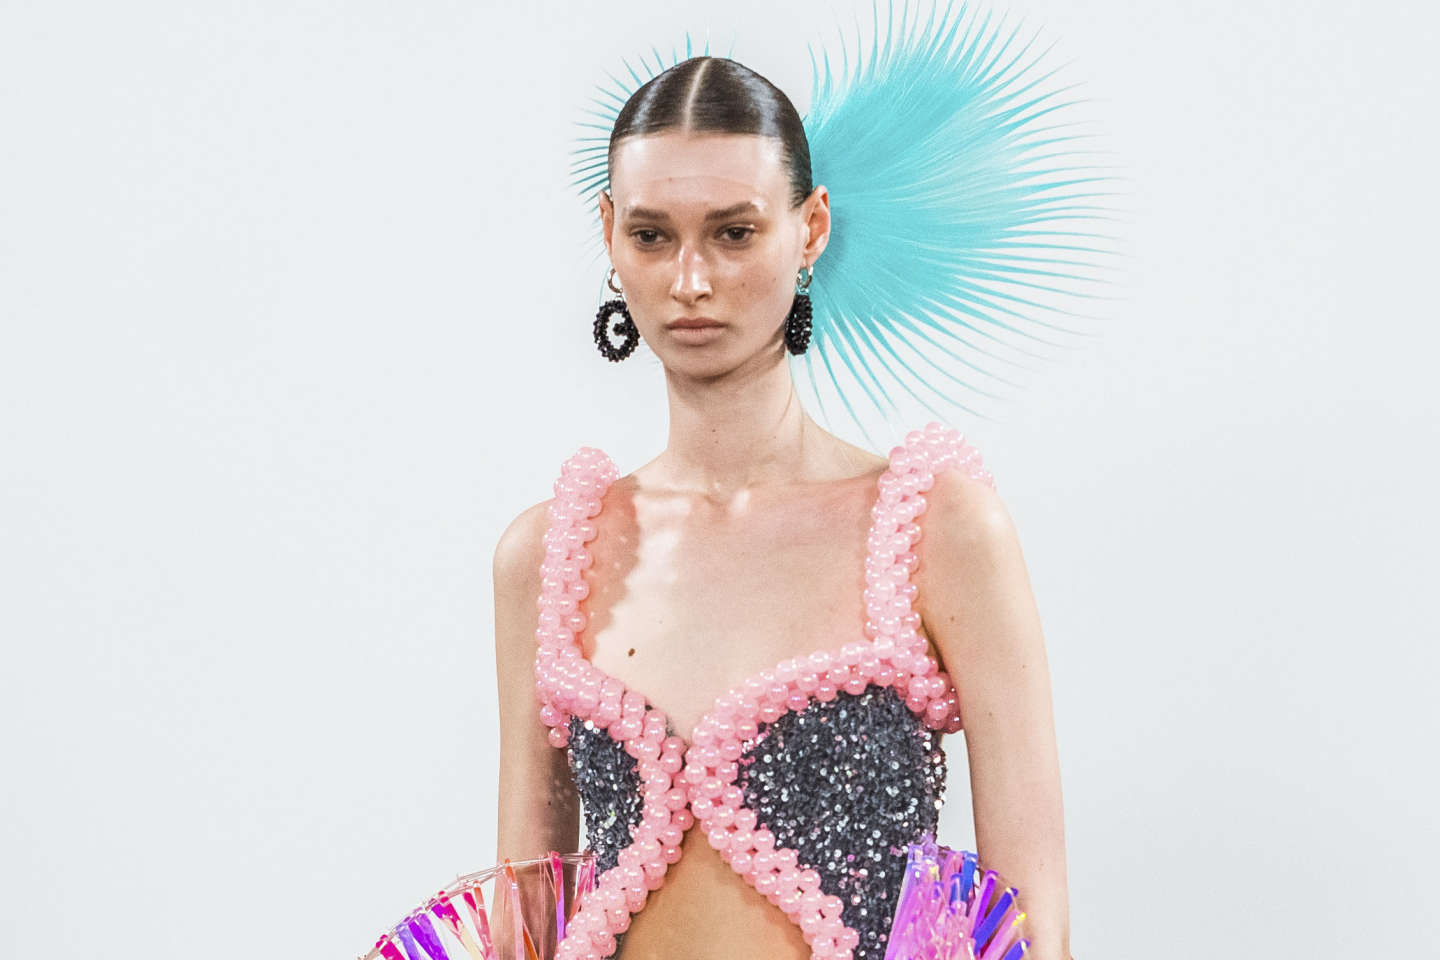 Paris Fashion Week: from recycling to latex, two young designers enter into matters